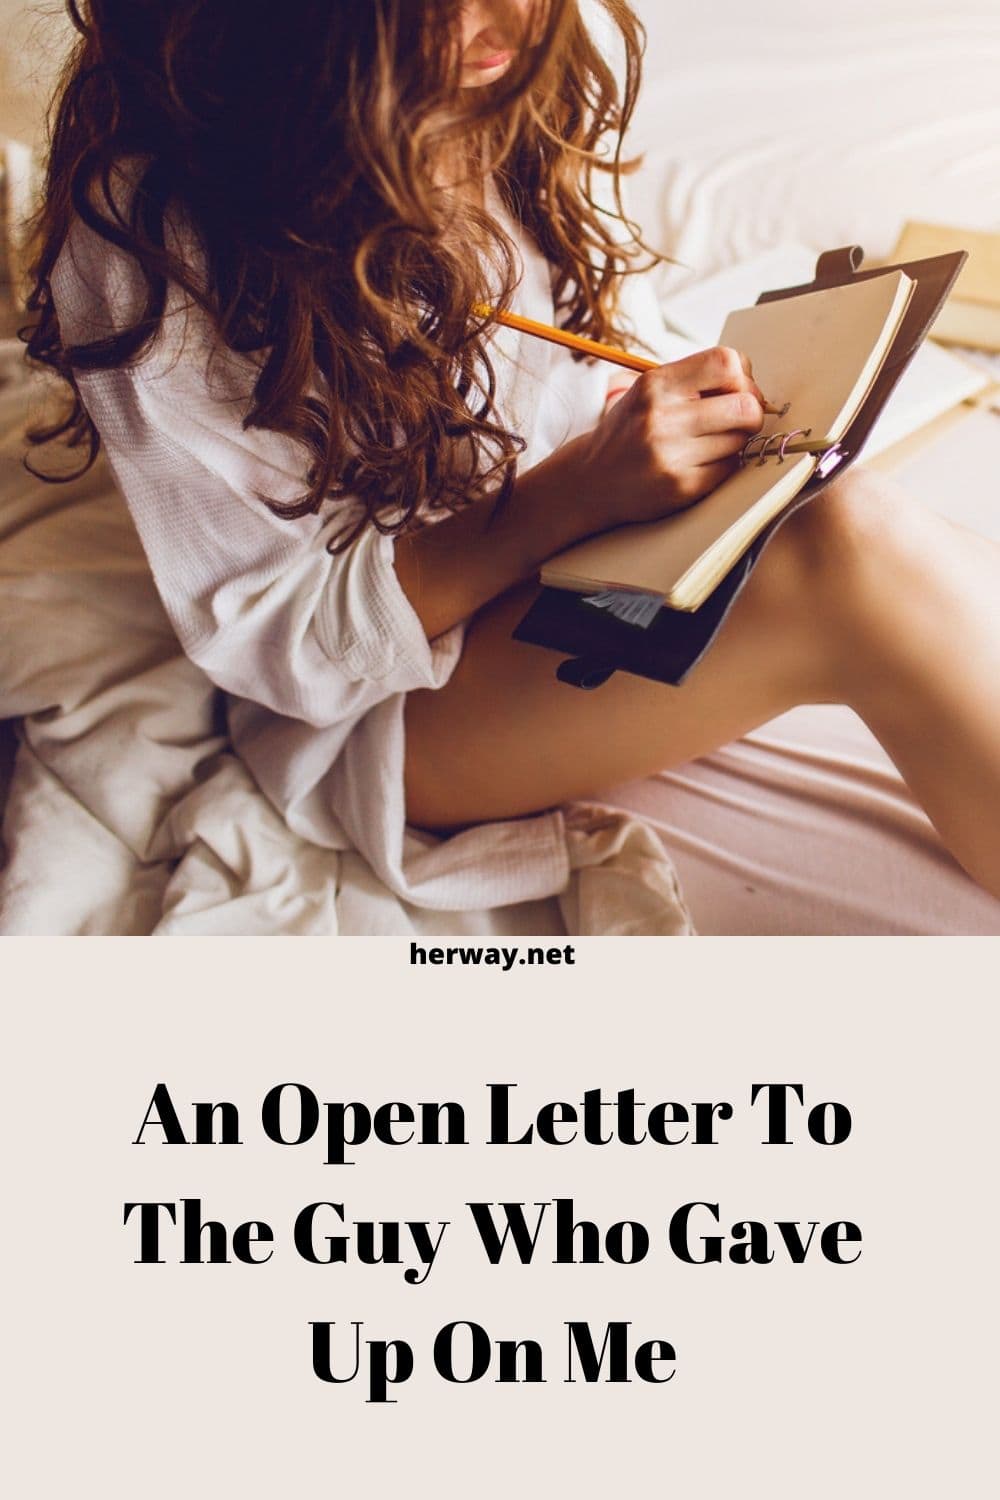 An Open Letter To The Guy Who Gave Up On Me